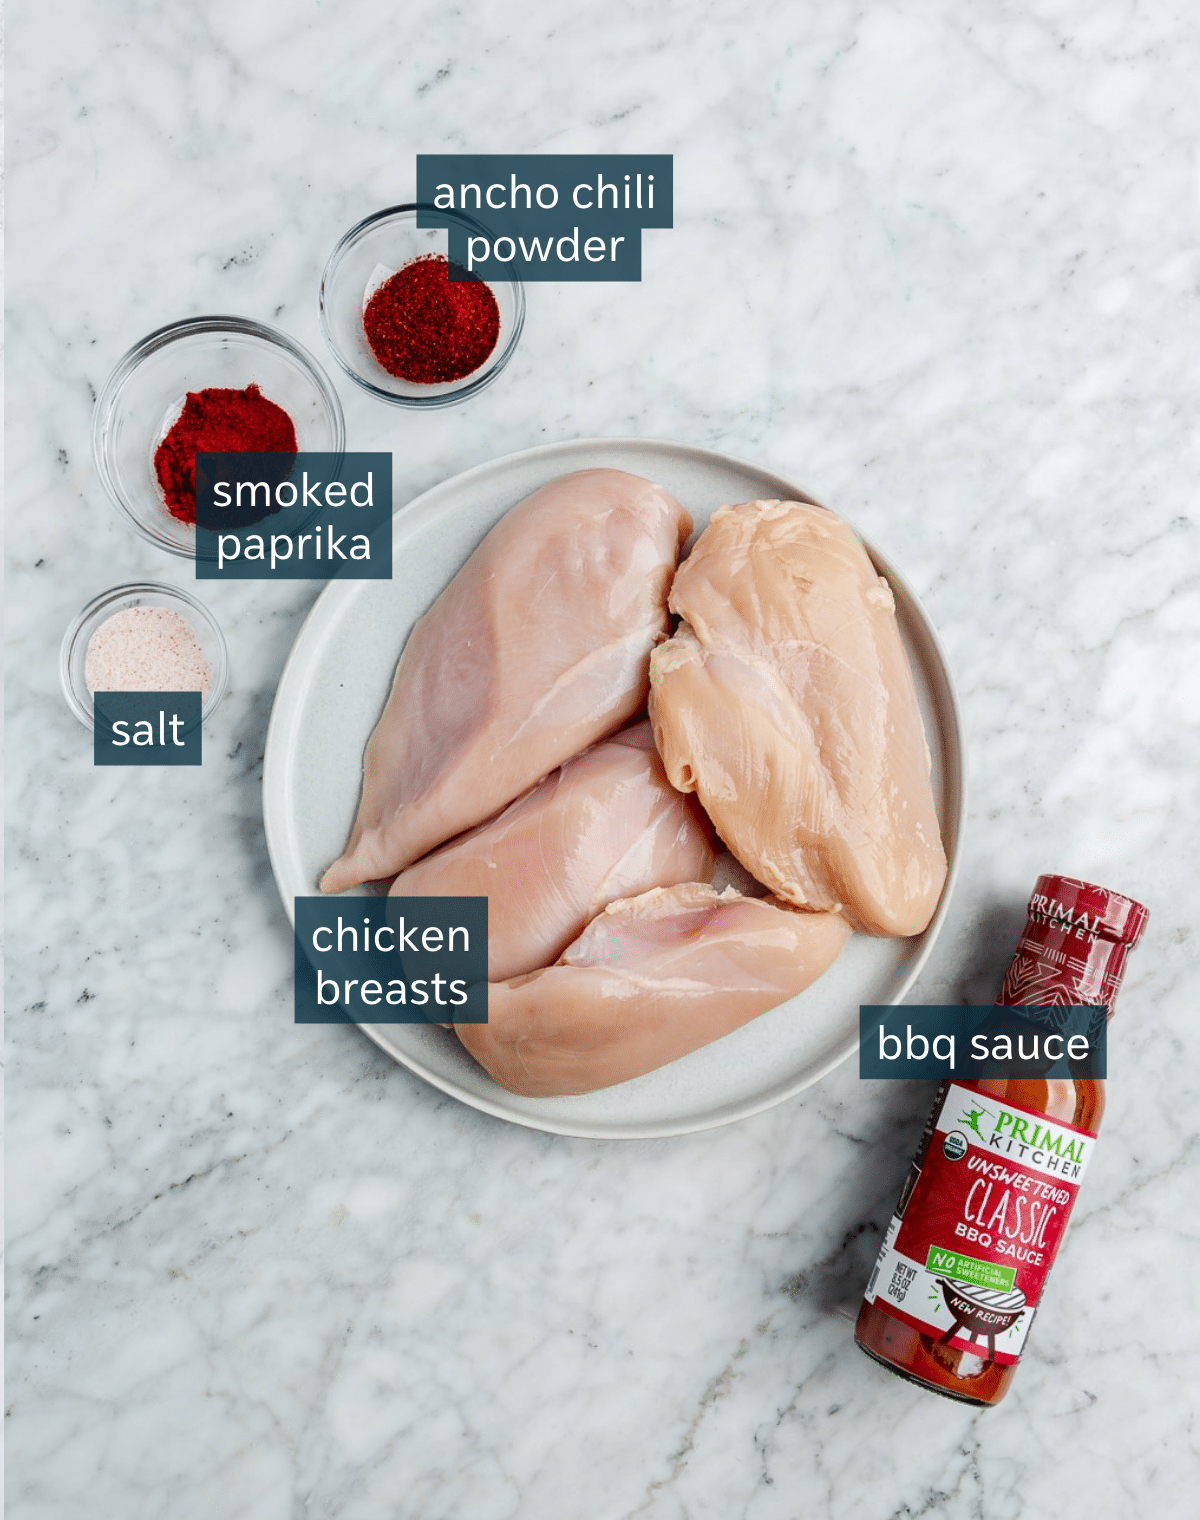 Ingredients for baked bbq chicken breasts sit in a variety of bowls on a marble countertop.